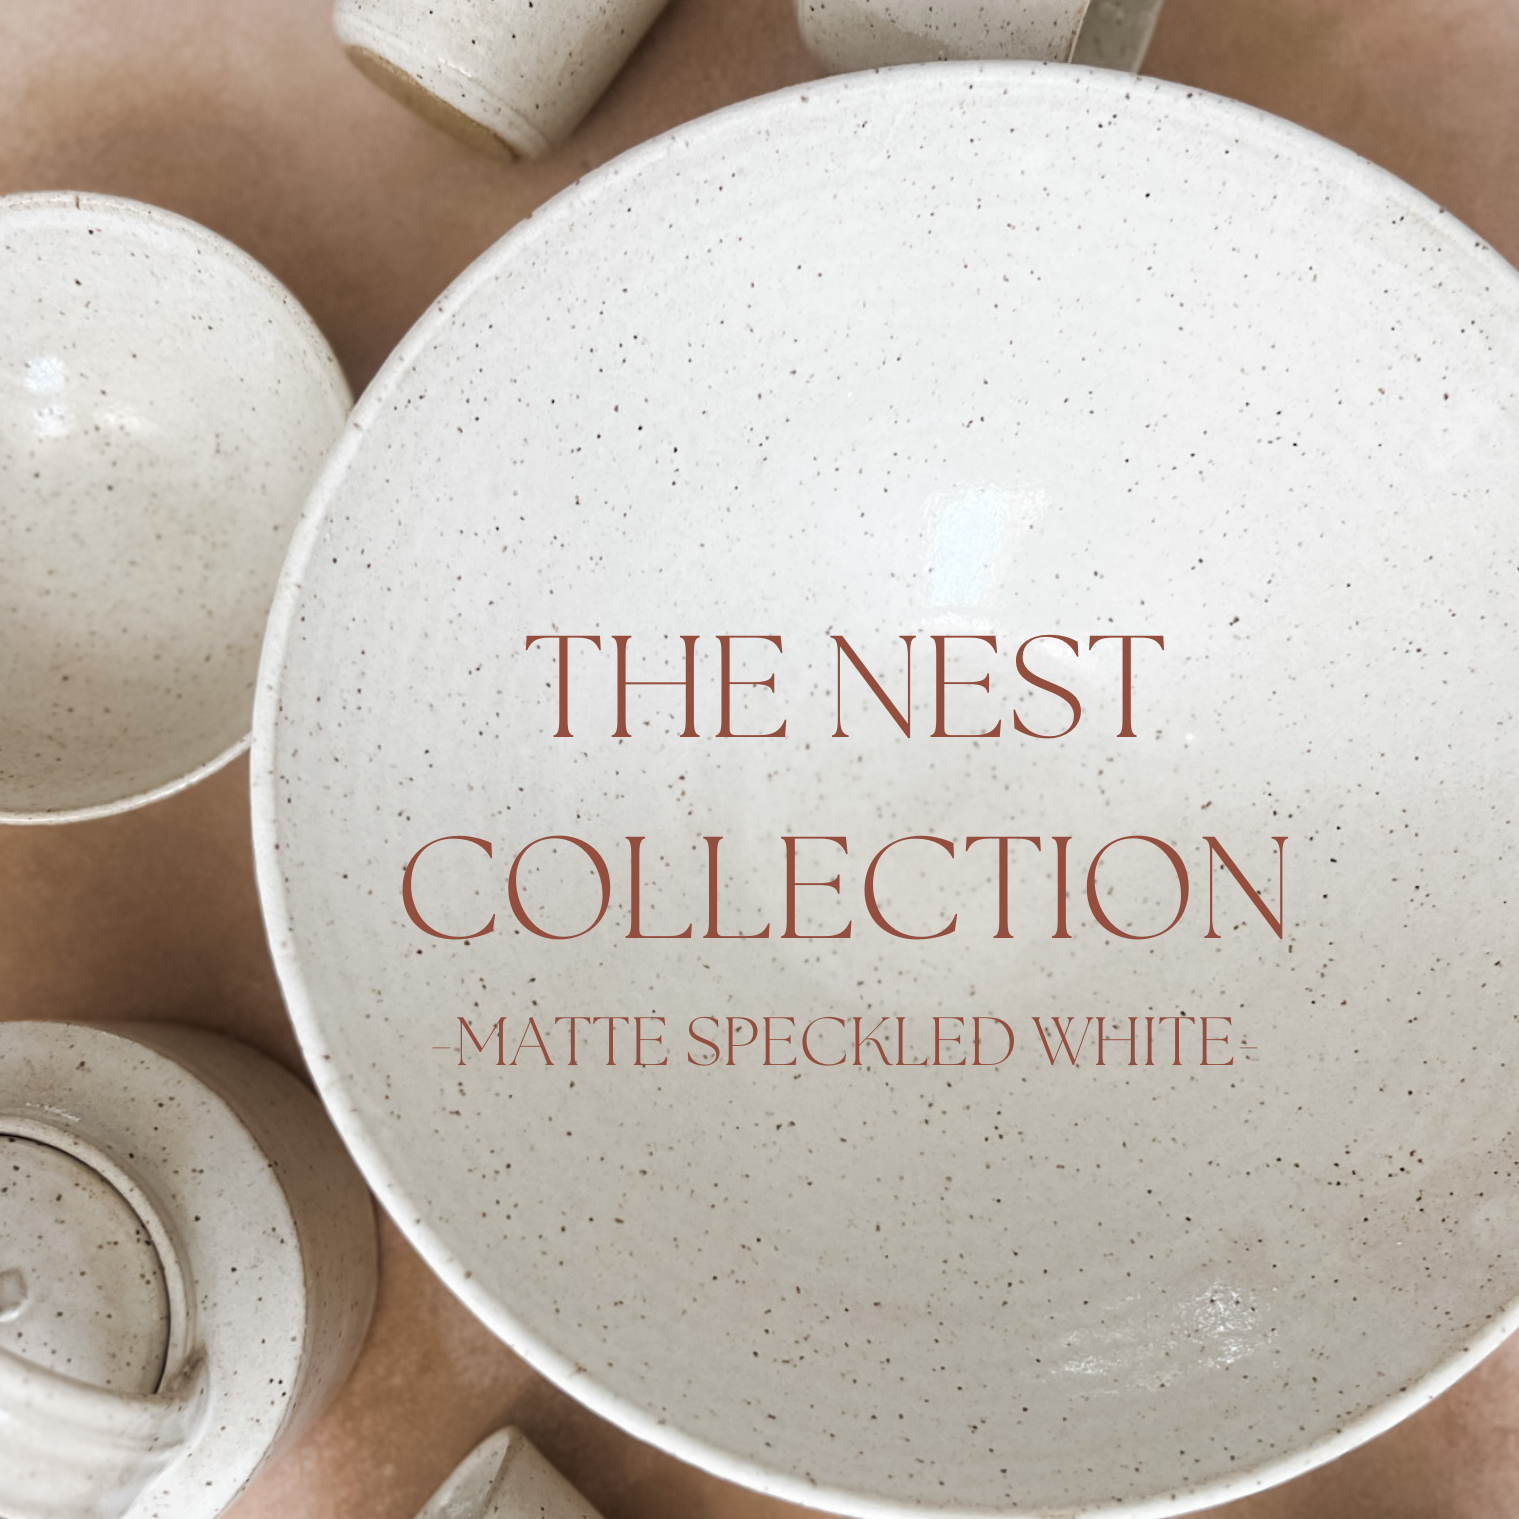 The Daily Ritual Mug - The Nest Collection